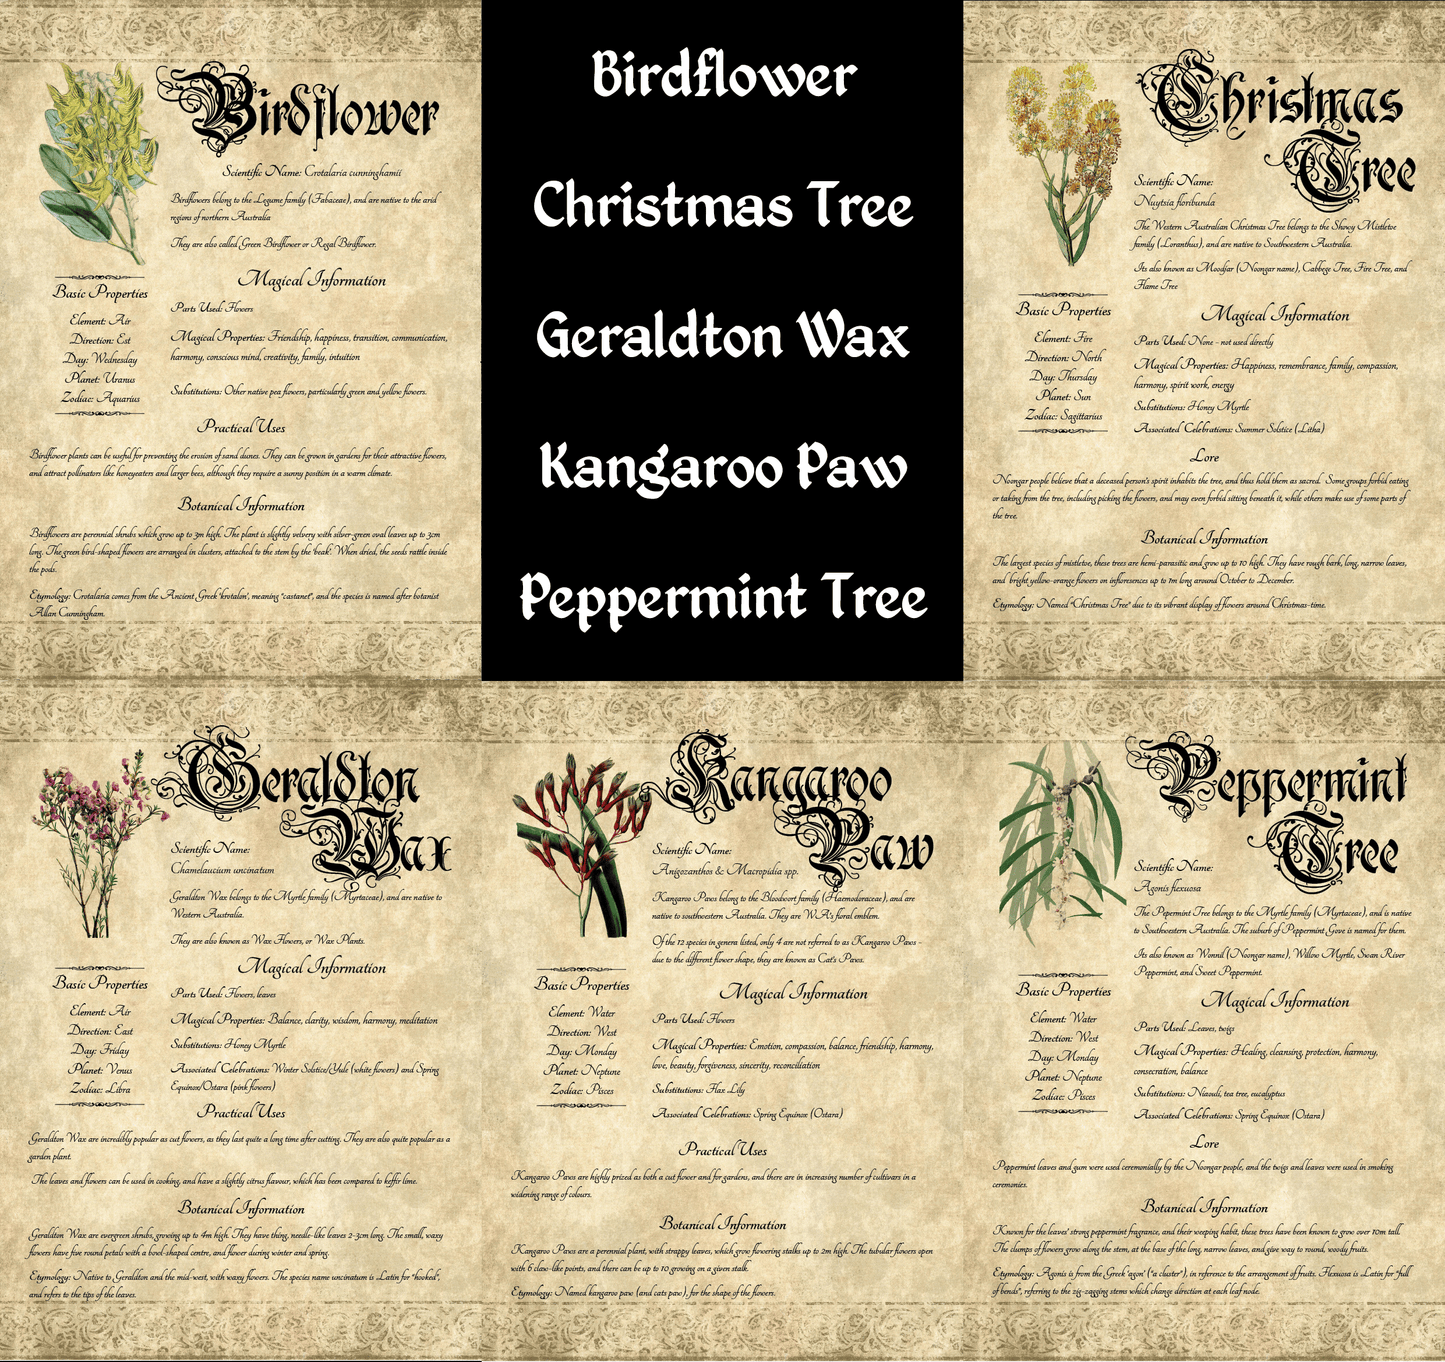 Collage of antique-style grimoire pages; text lists "Birdflower, Christmas Tree, Geraldton Wax, Kangaroo Paw, Peppermint Tree